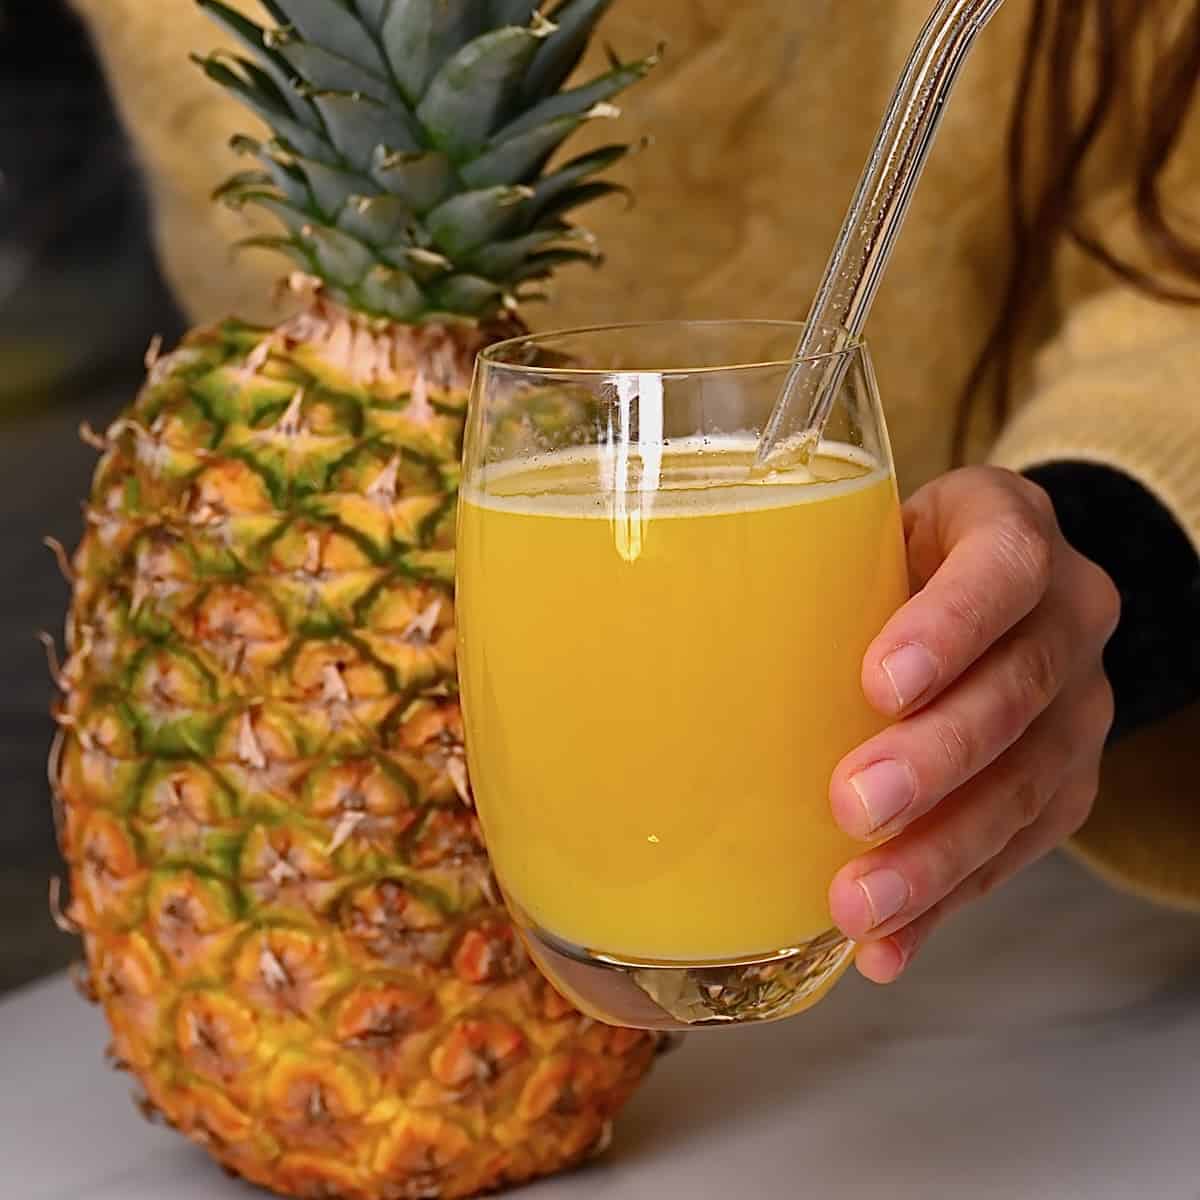 https://www.alphafoodie.com/wp-content/uploads/2022/02/How-to-Juice-a-Pineapple-Square.jpeg